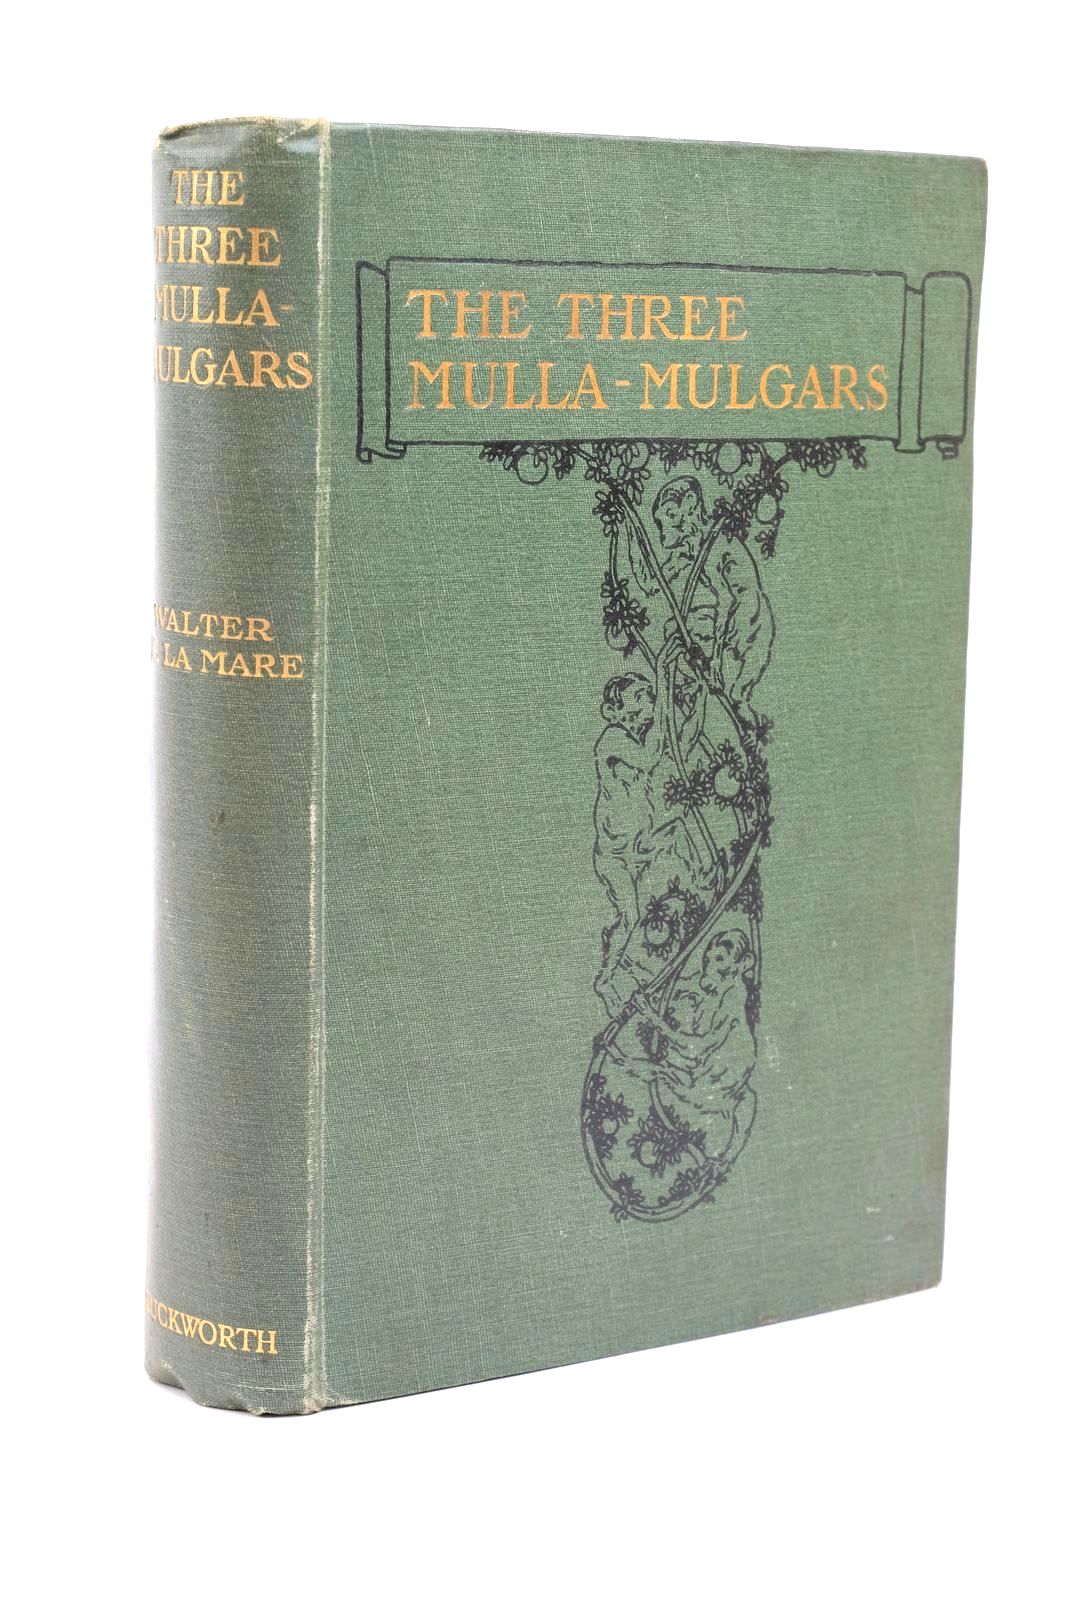 Photo of THE THREE MULLA-MULGARS written by De La Mare, Walter illustrated by Monsell, J.R. published by Duckworth &amp; Co. (STOCK CODE: 1323088)  for sale by Stella & Rose's Books